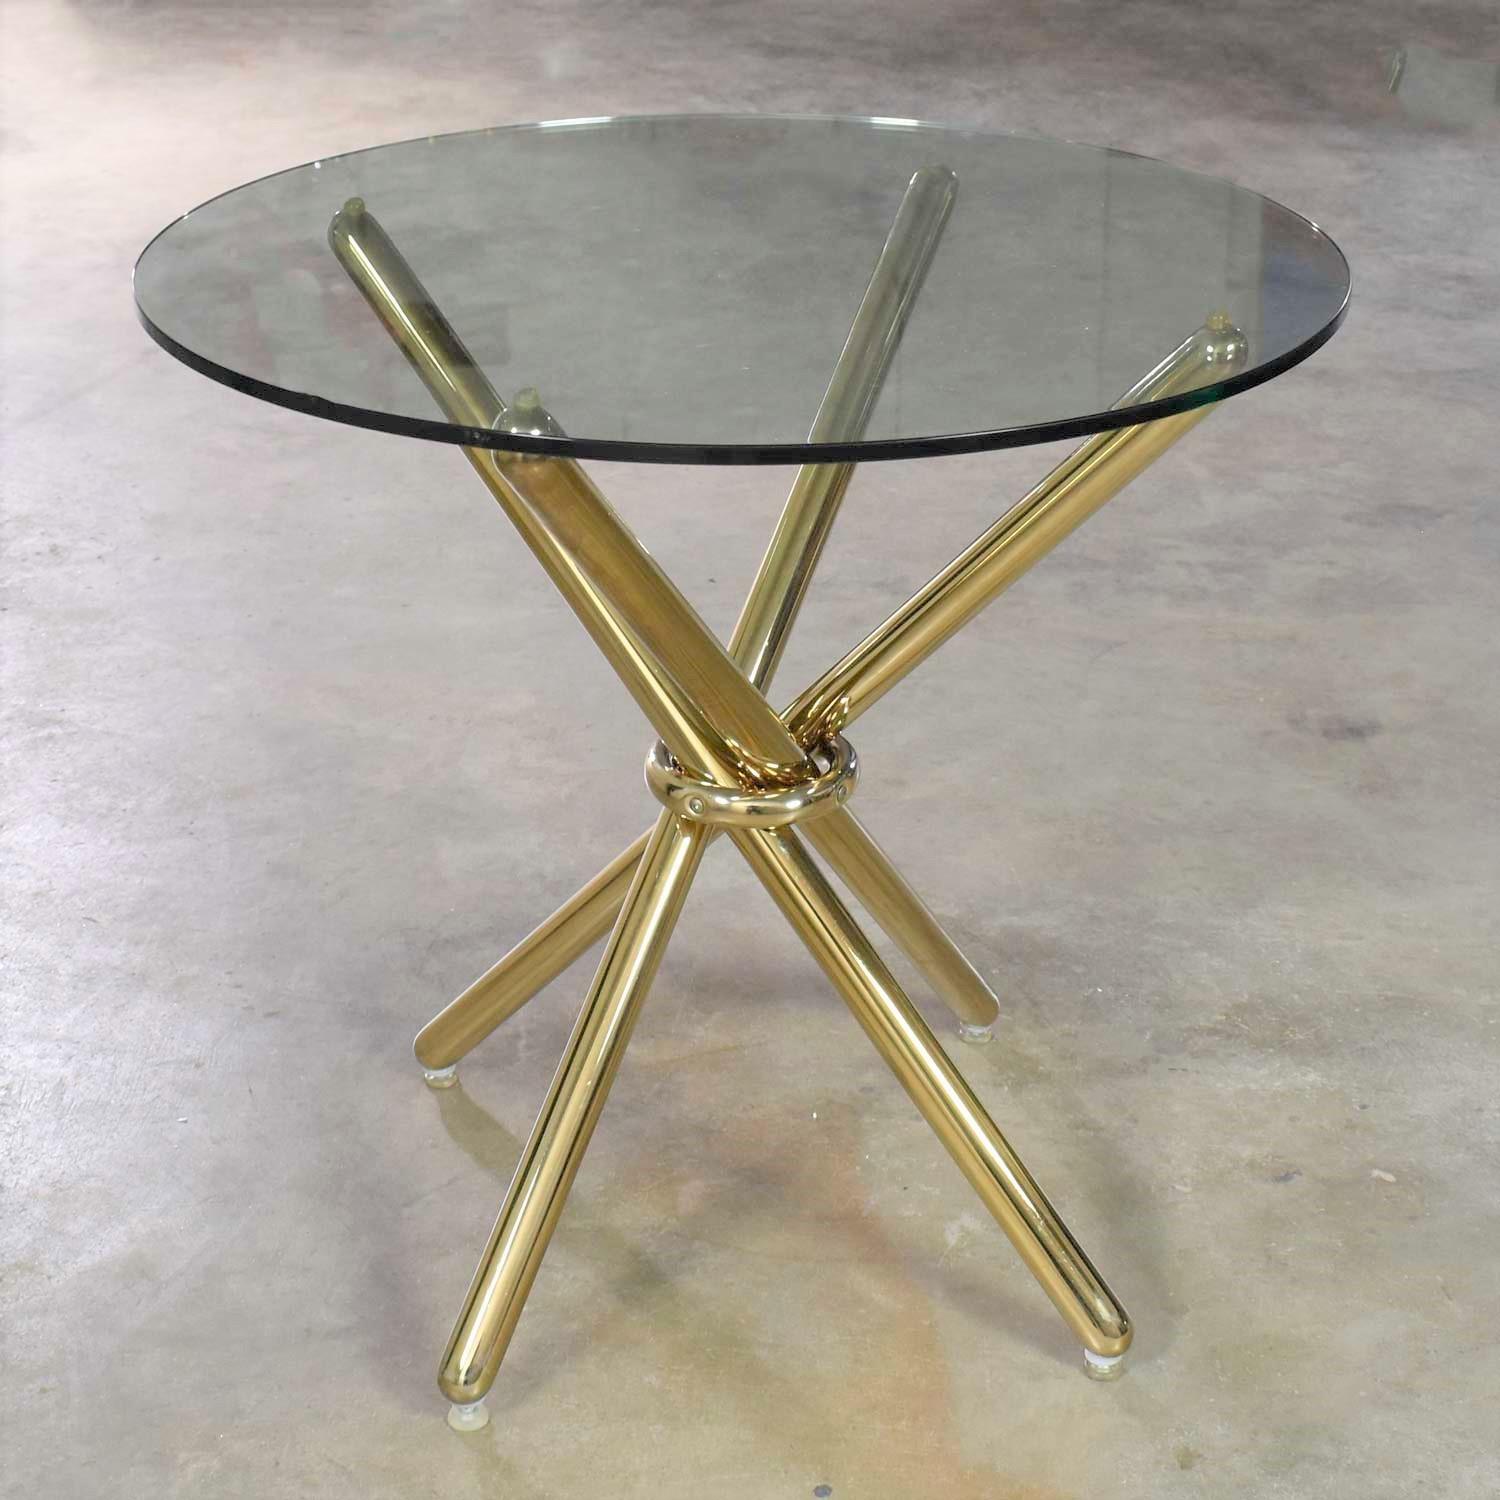 Vintage Modern Brass-Plated Jax Center or End Table with Round Glass Top 4